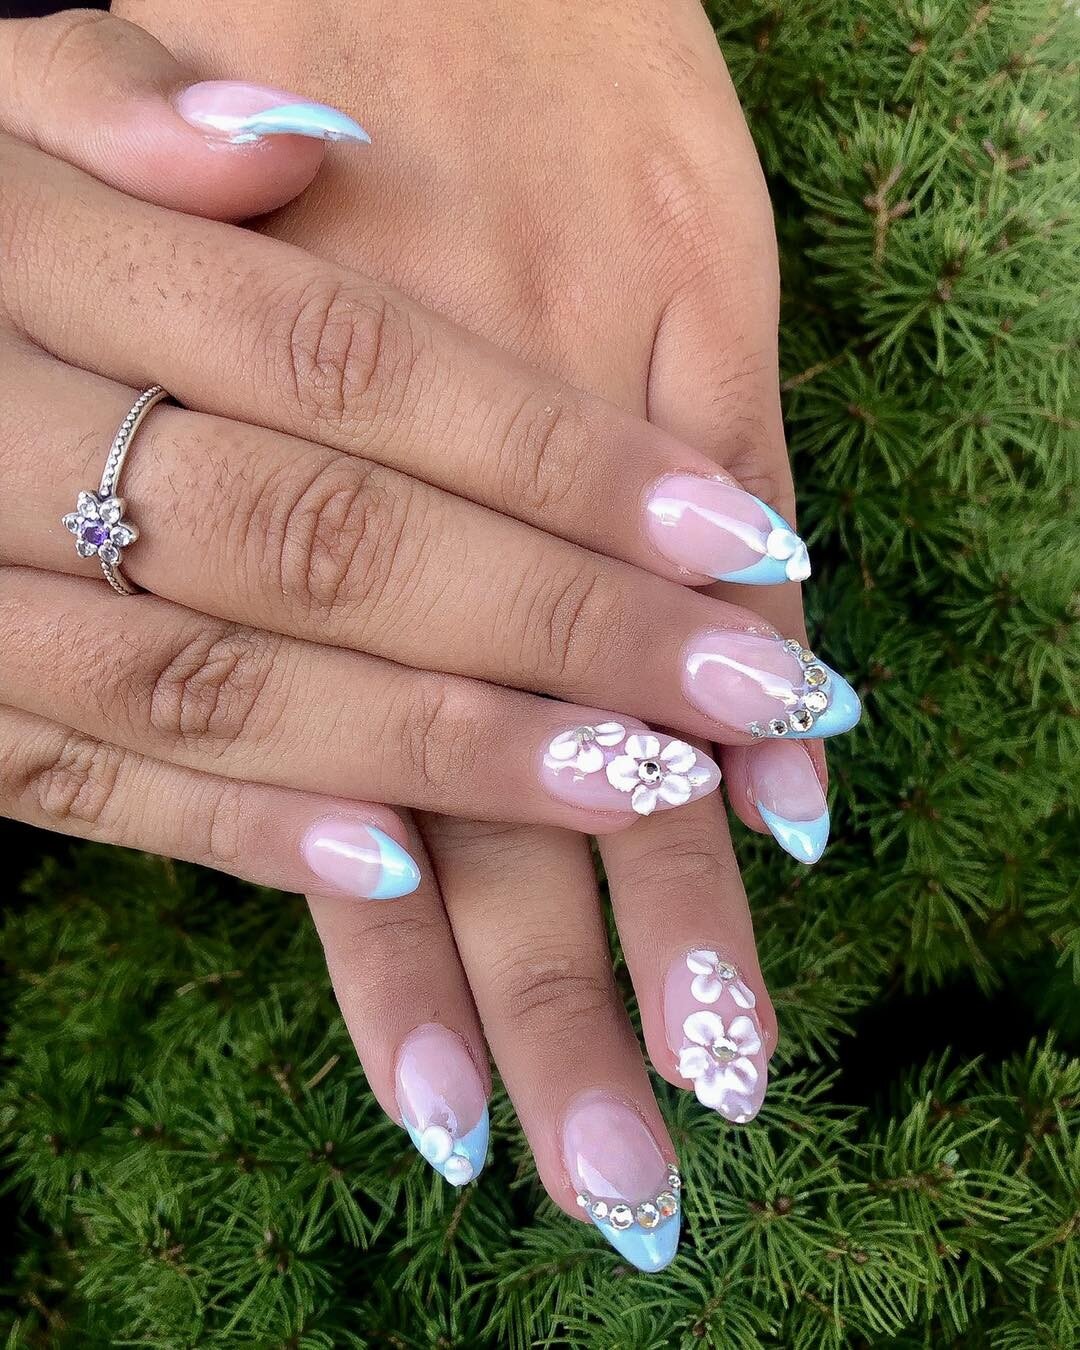 Hey girl! If you're reading this then you know what I'm talking about. You need to book your appointment with Lissette ASAP because this mani is sooo gorgeous and it's the perfect way to start off your weekend 💅🍸

#wilmingtondelaware #hockessindela